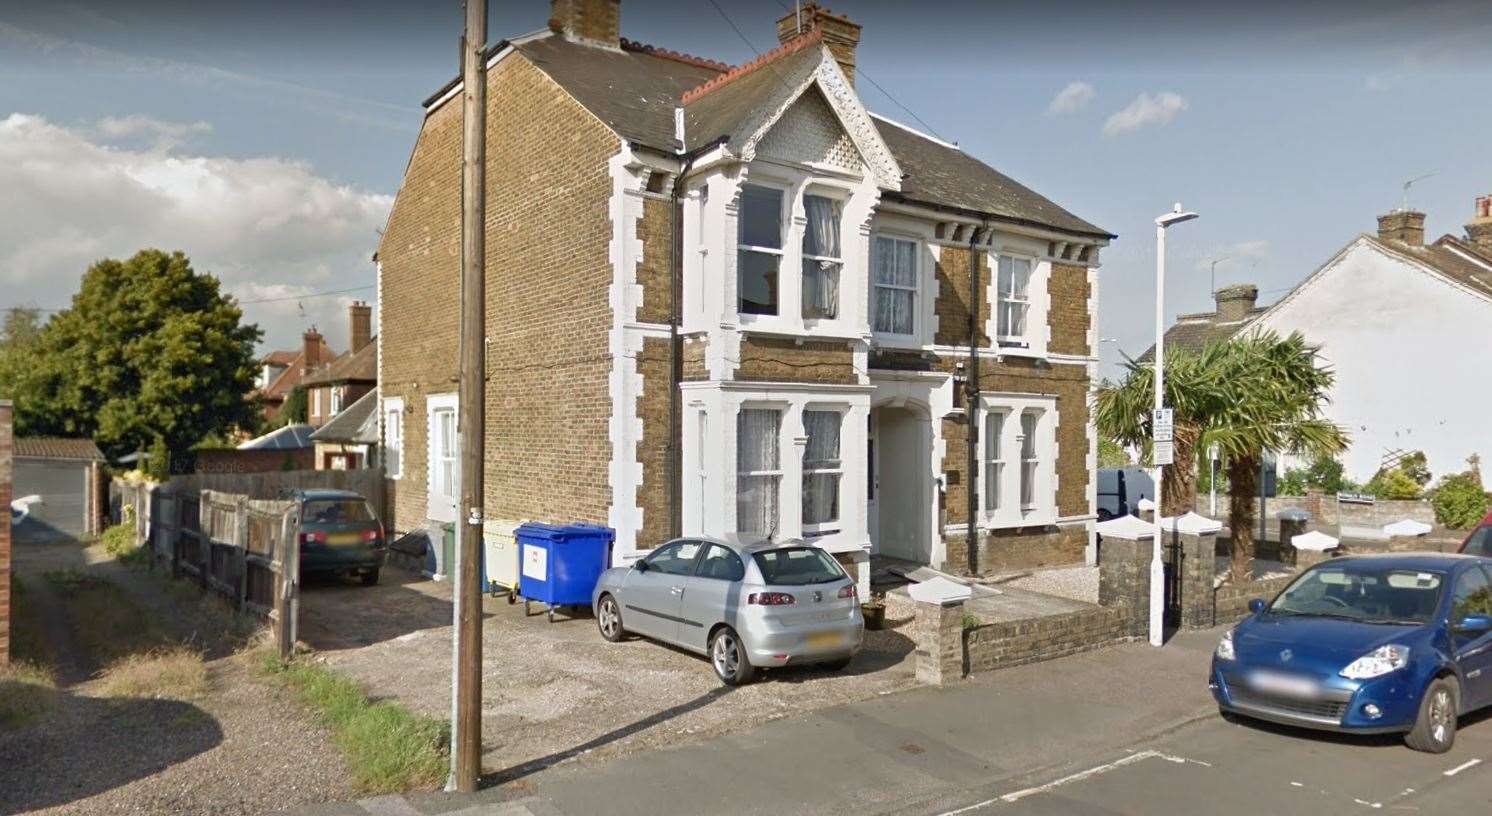 Ashurst House residential care home in Faversham has been rated inadequate